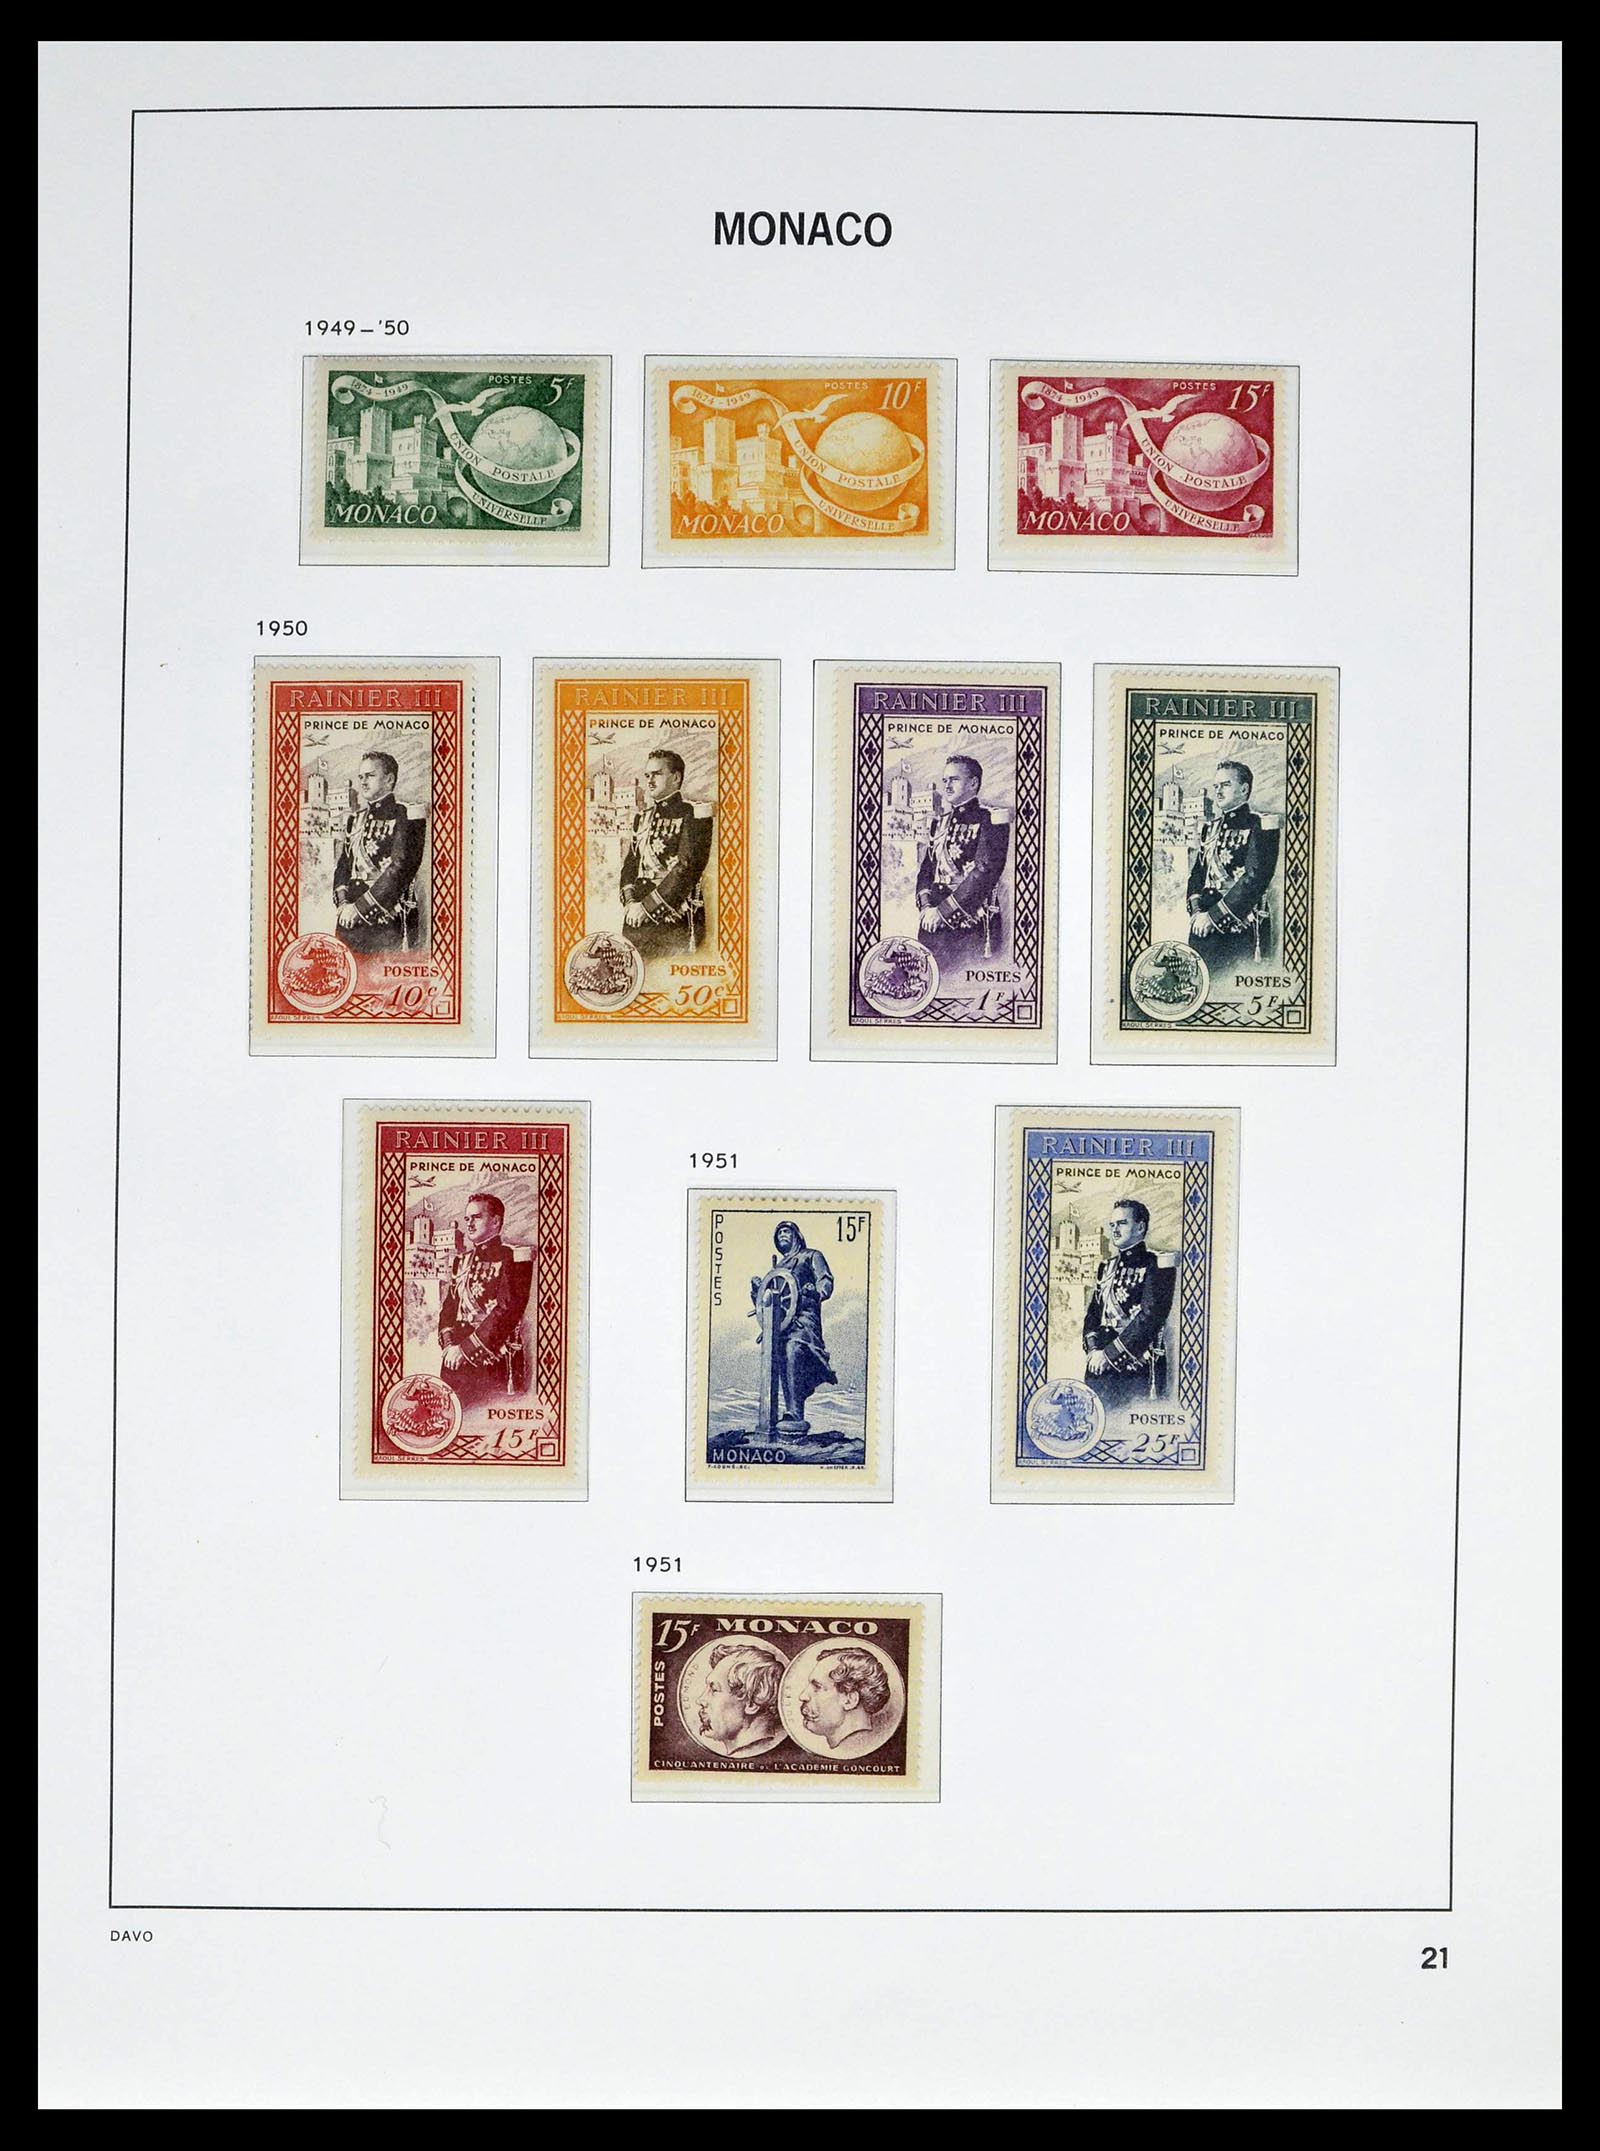 39110 0025 - Stamp collection 39110 Monaco complete 1885-1994.